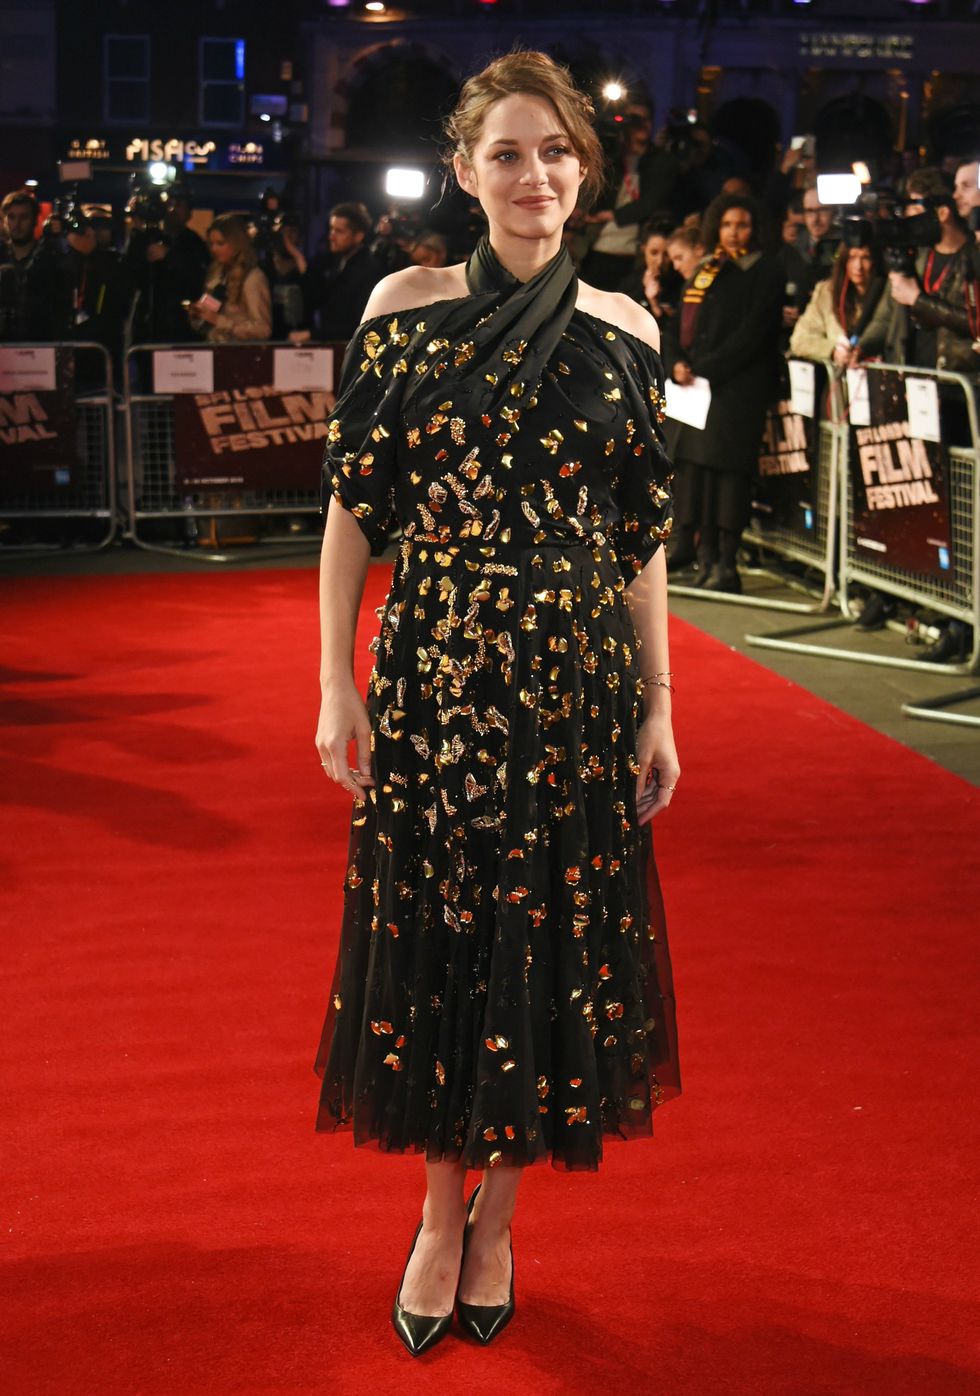 London Film Festival - It's Only the End of the World premiere with Marion Cotillard and Lea Seydoux